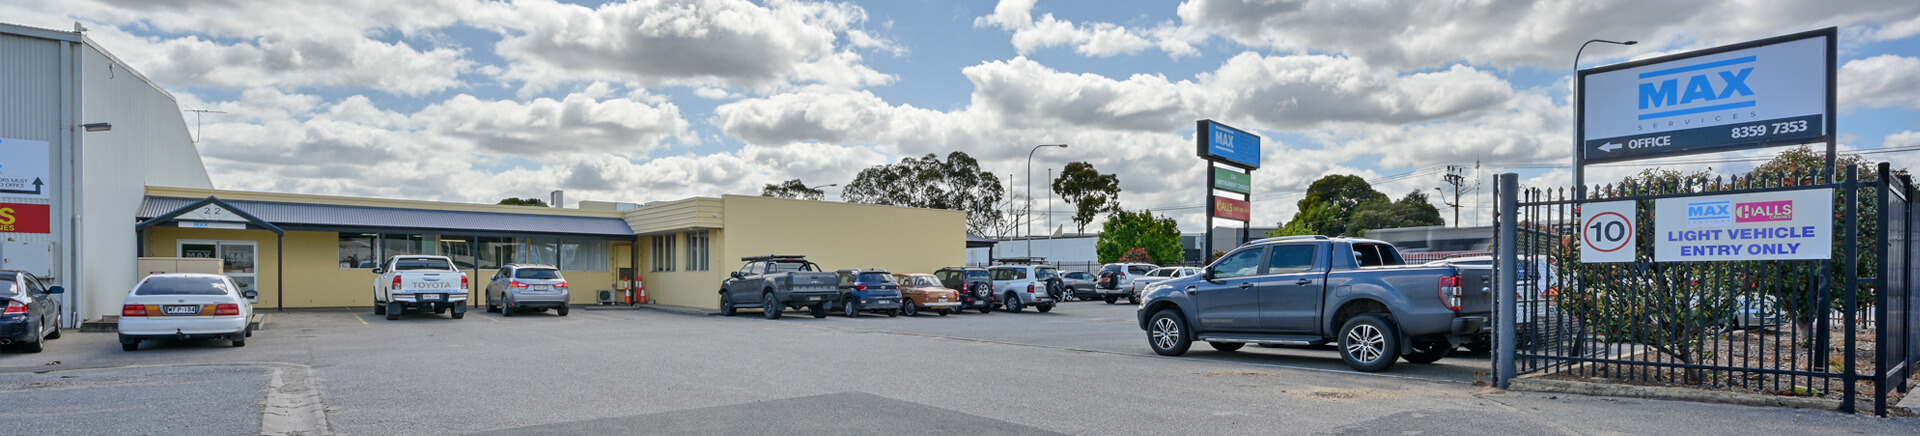 MAX Services Adelaide Depot